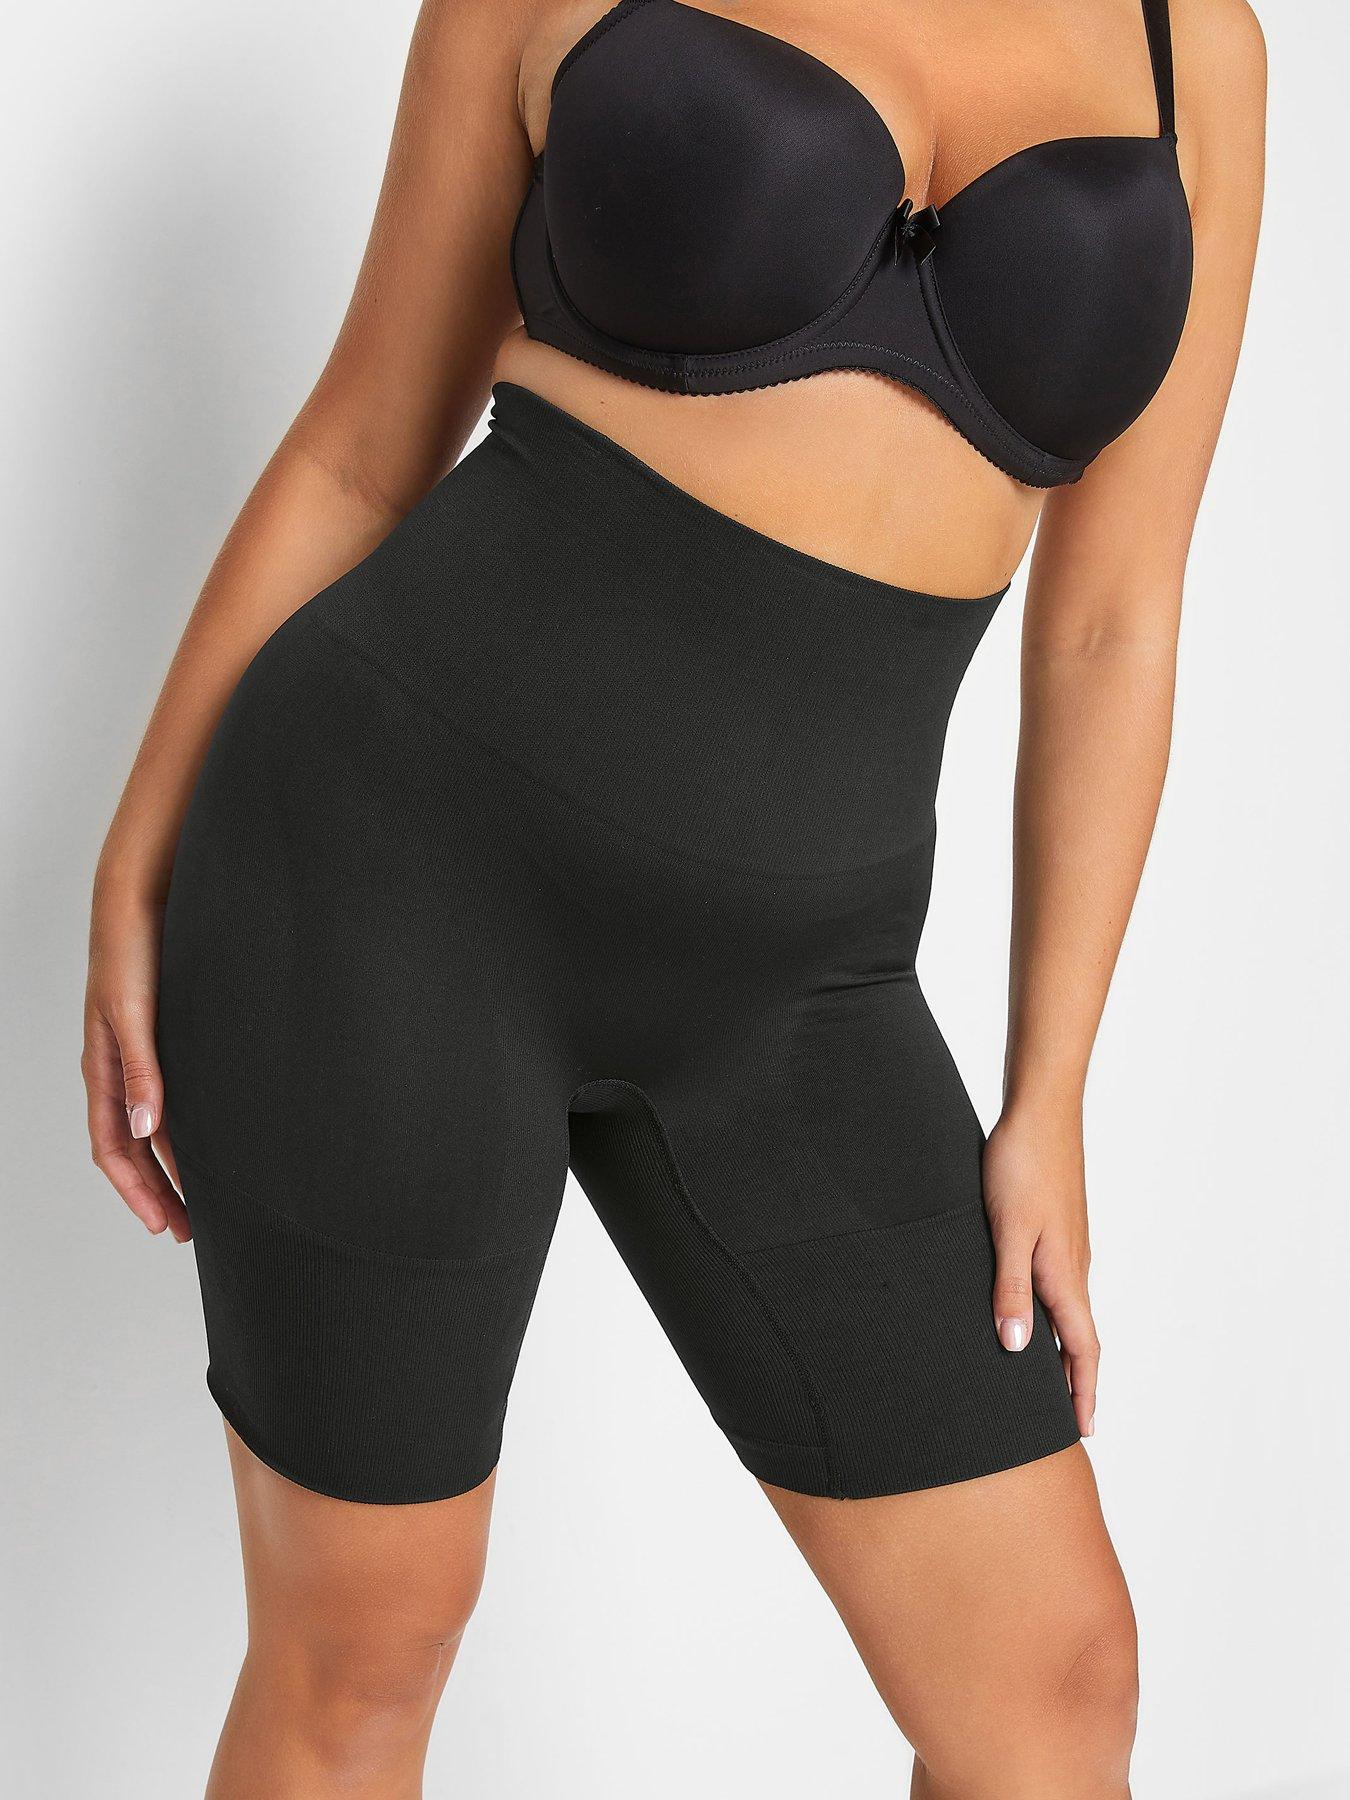 Spanx OnCore High-Waisted Mid-Thigh Shorts in Black